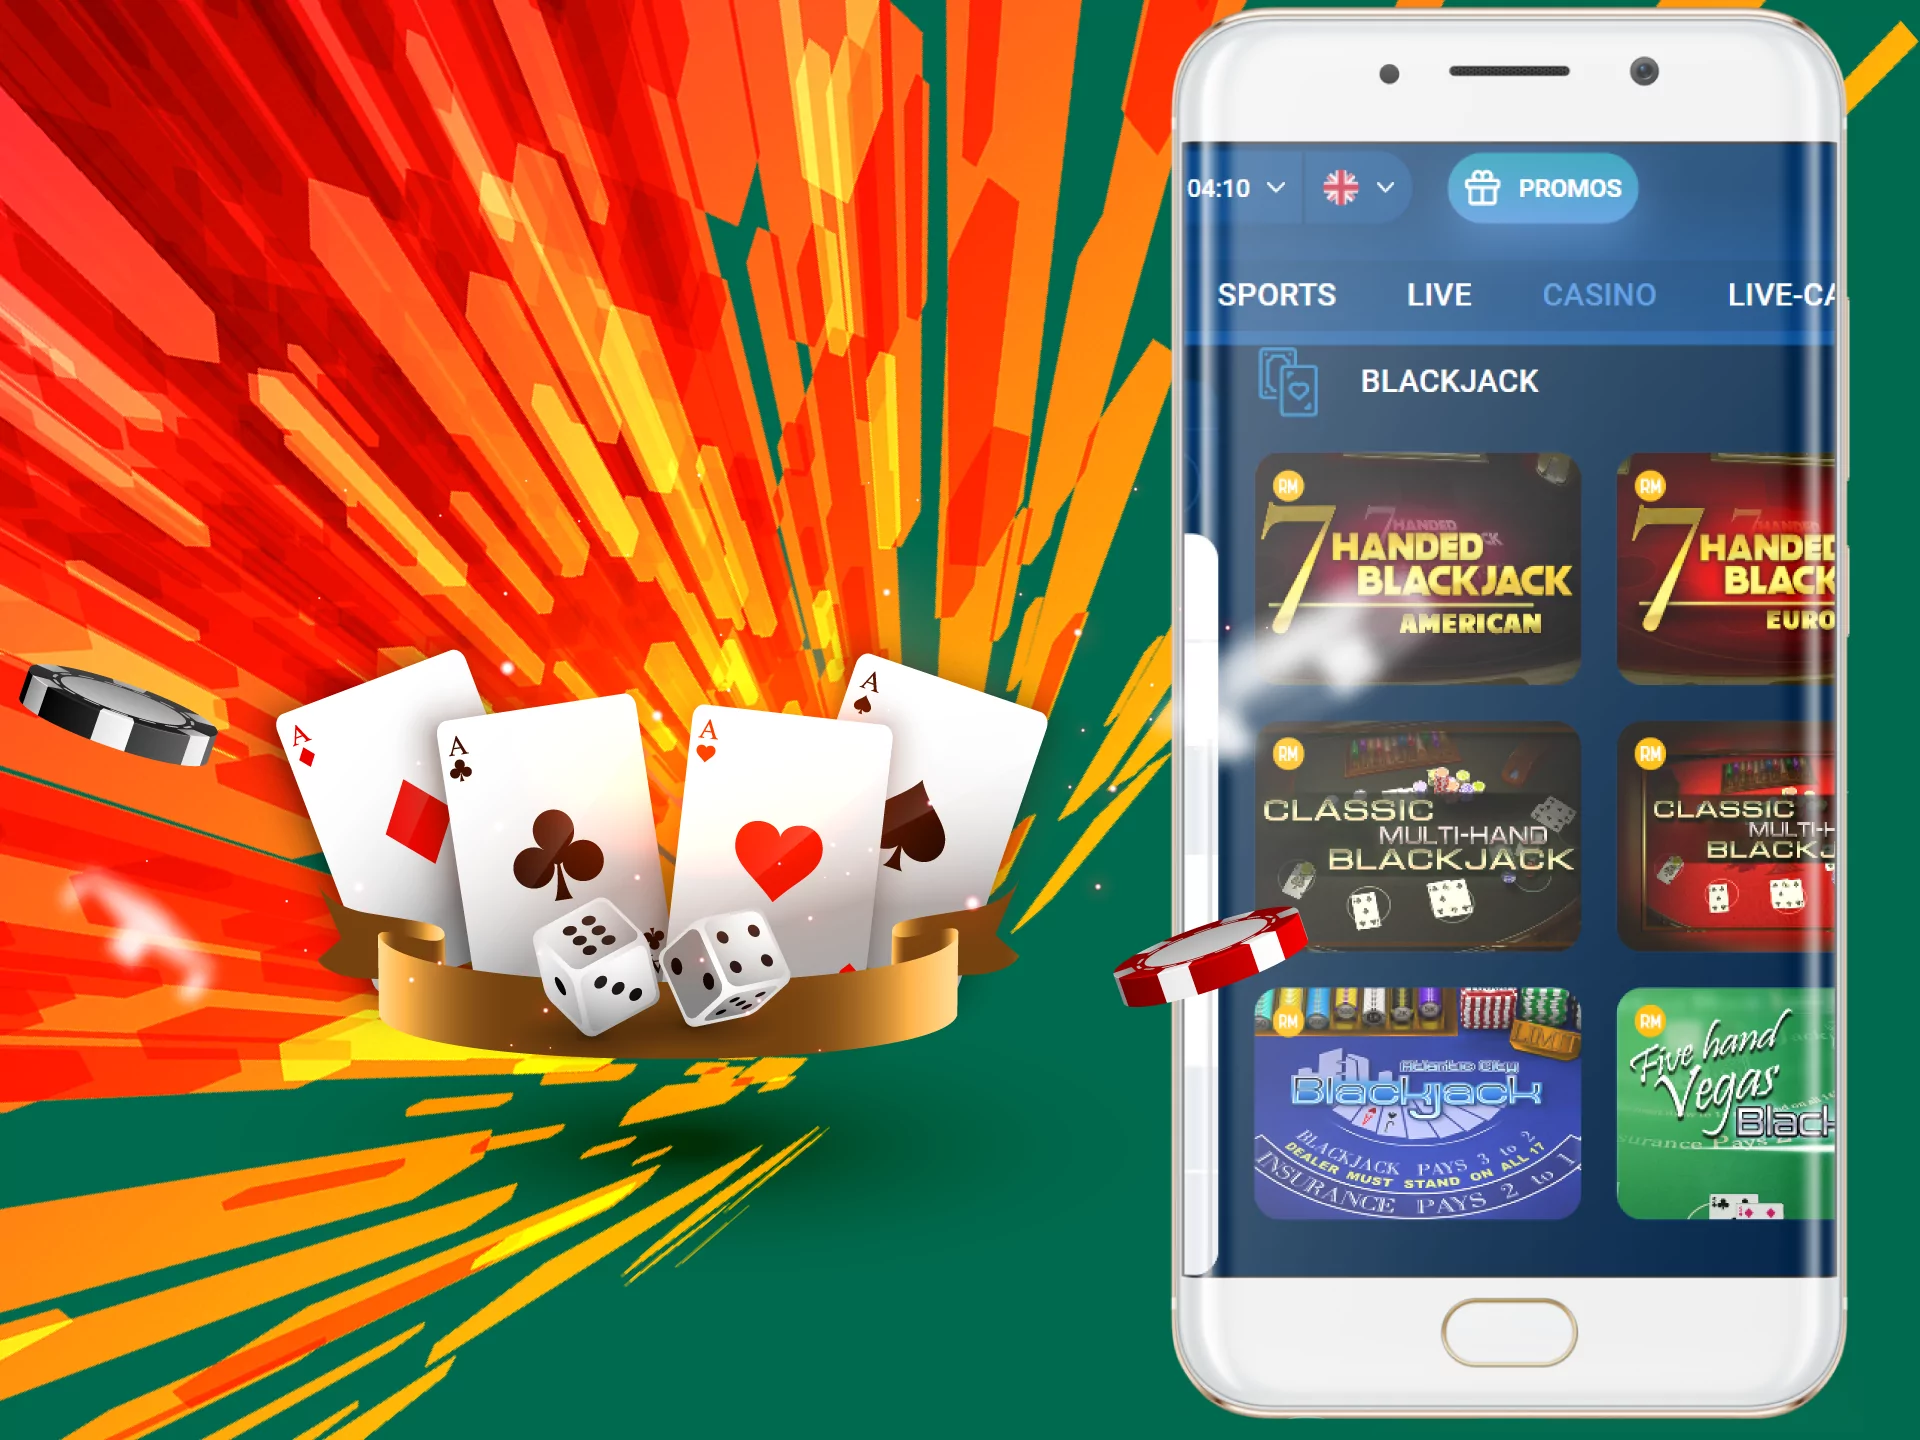 Blackjack is one of the most popular games at Mostbet.